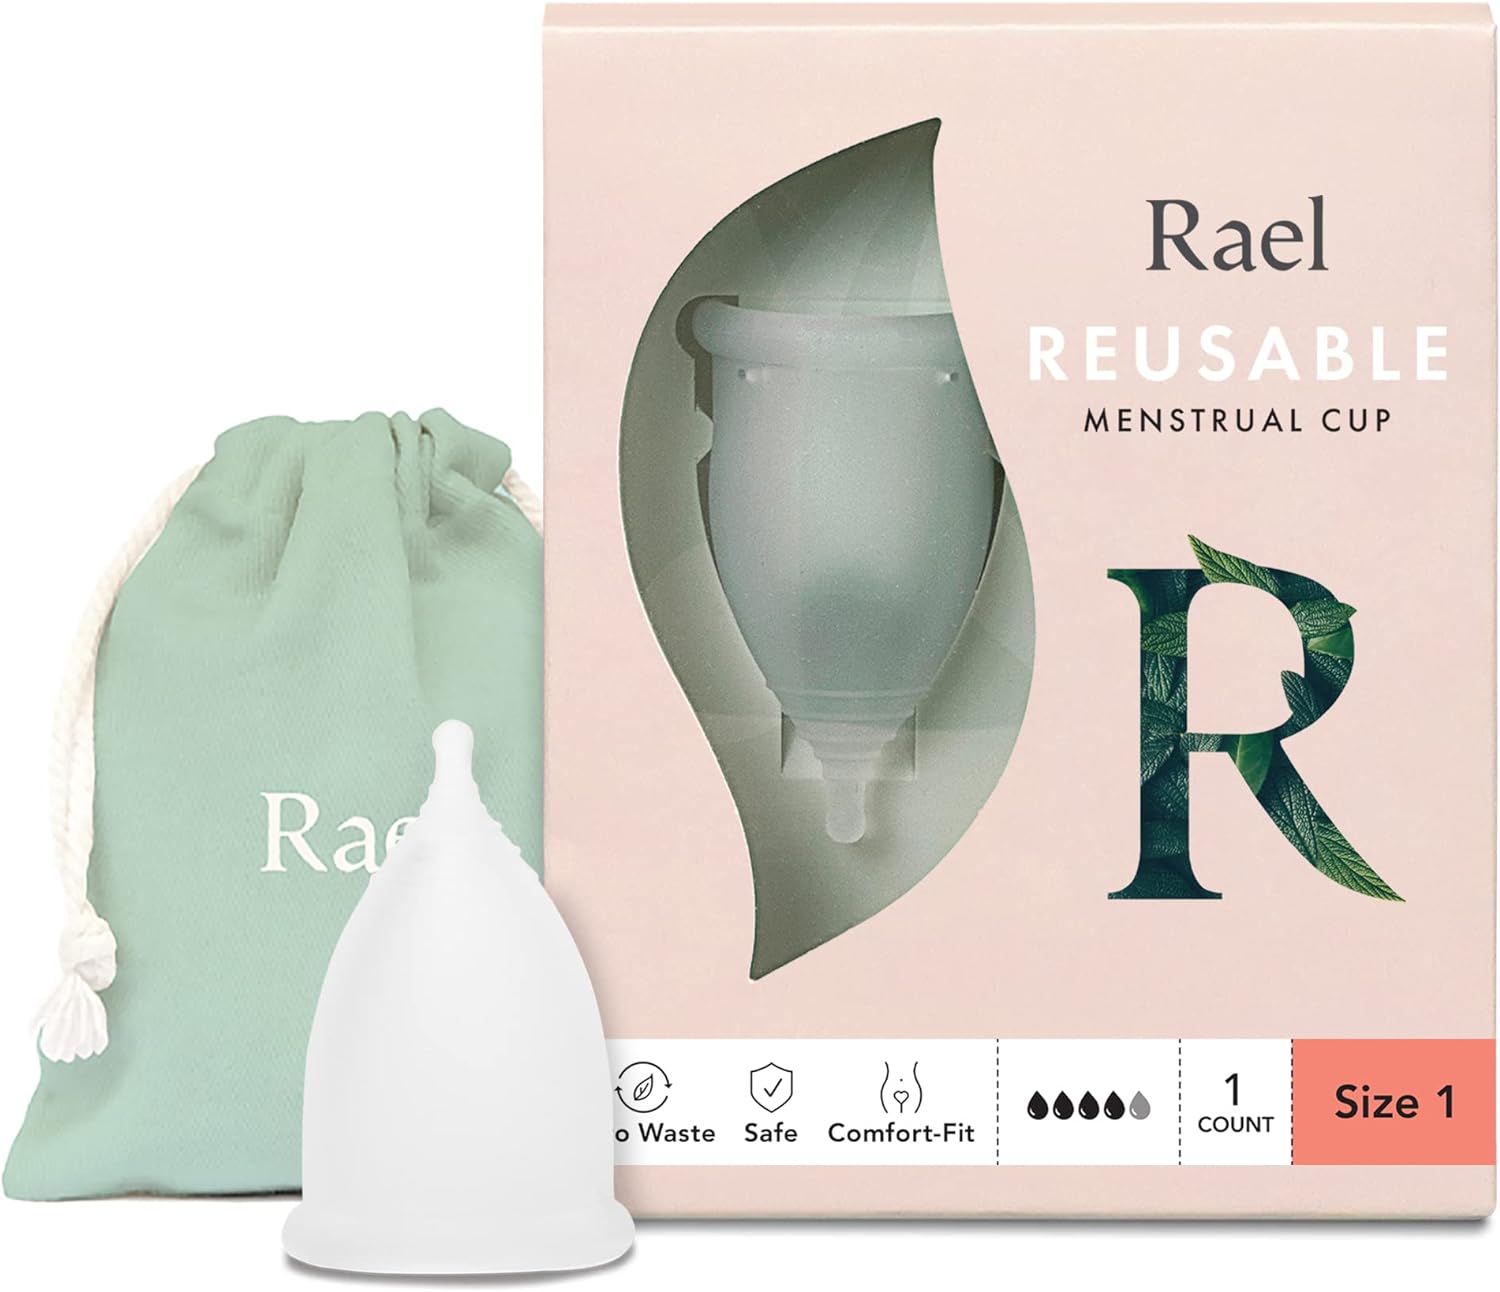 Rael Period Cup, Soft Reusable Menstrual Cups for Women - Medical-Grade Silicone, Period Cups for Women Medium Flow, BPA Free, Made in USA Tampon Pad Alternative (Size 1)